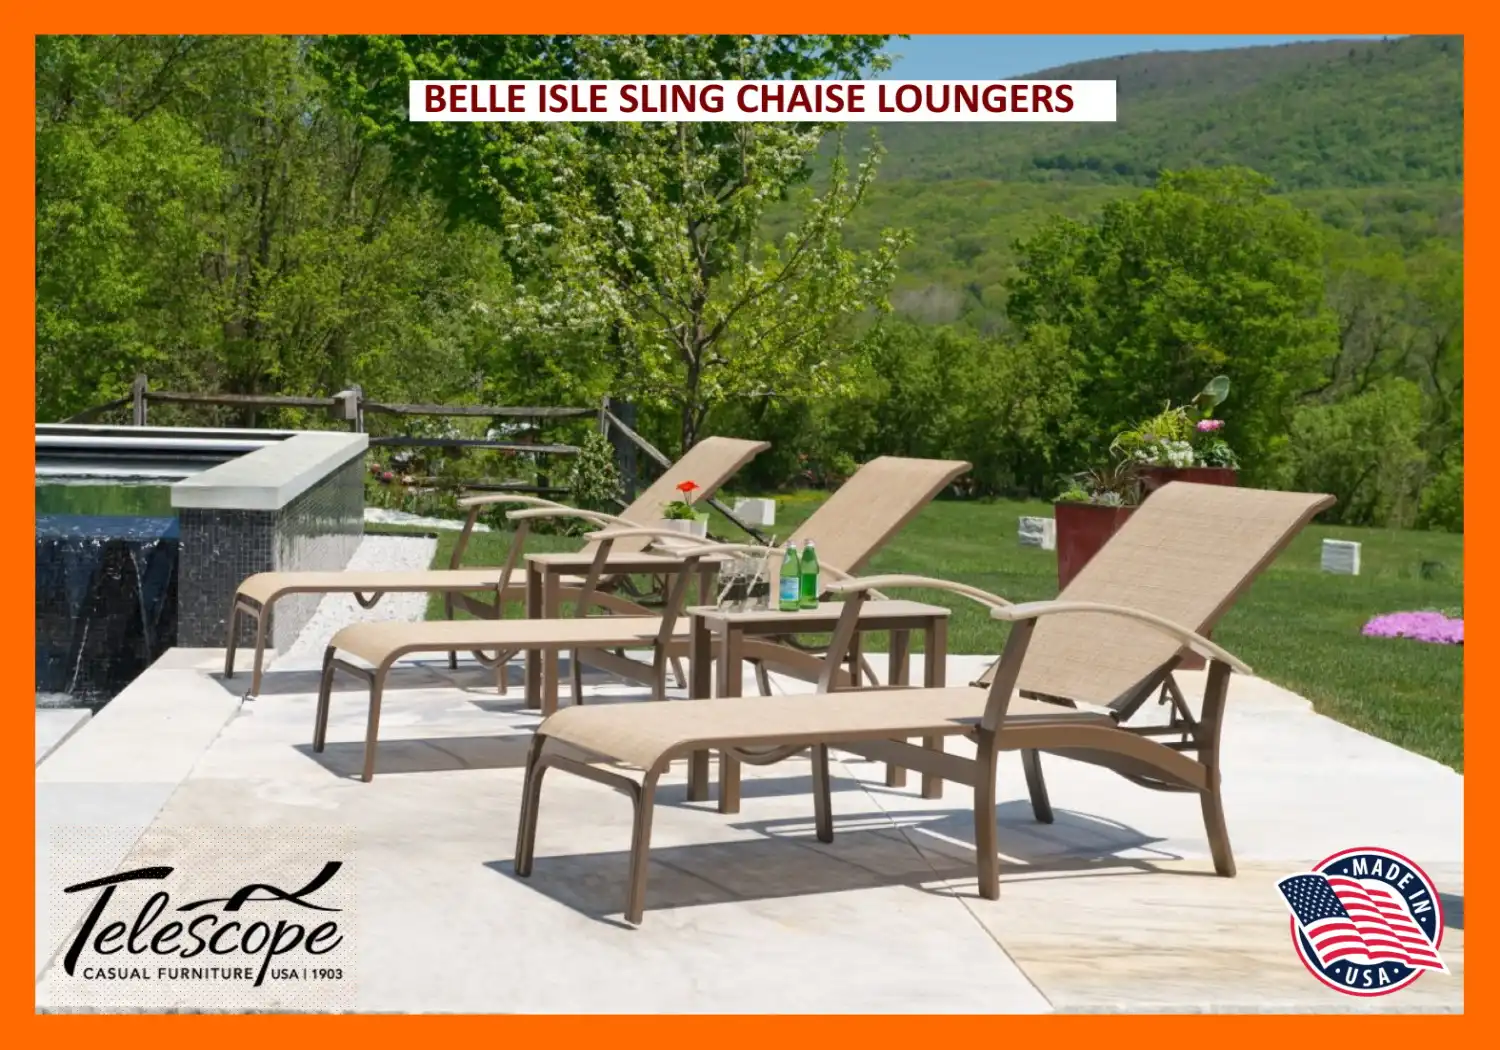 BELLE ISLE SLING CHAISE LOUNGERS